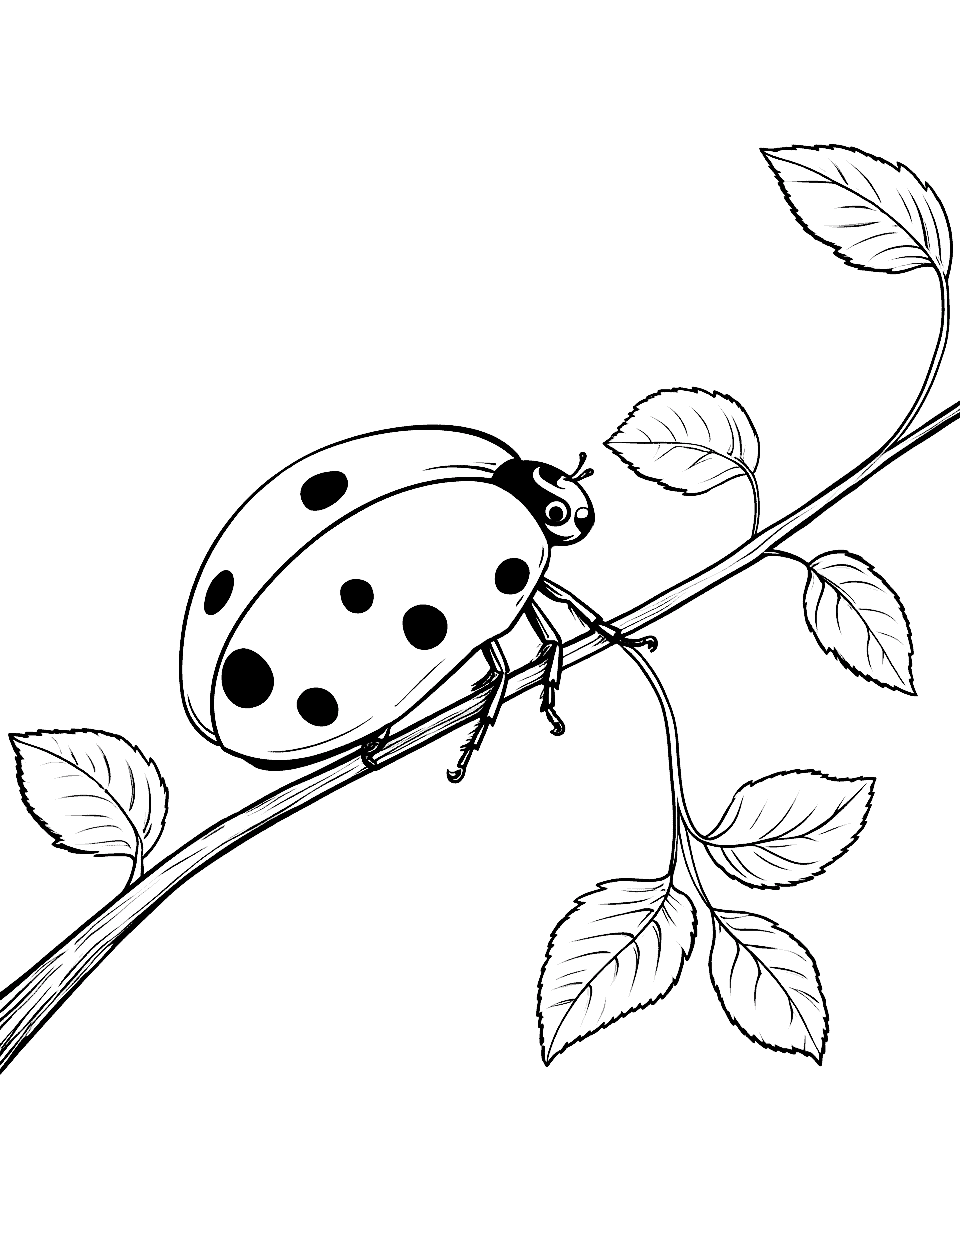 Ladybird Adventure on a Branch Ladybug Coloring Page - A ladybird navigating a tree branch.